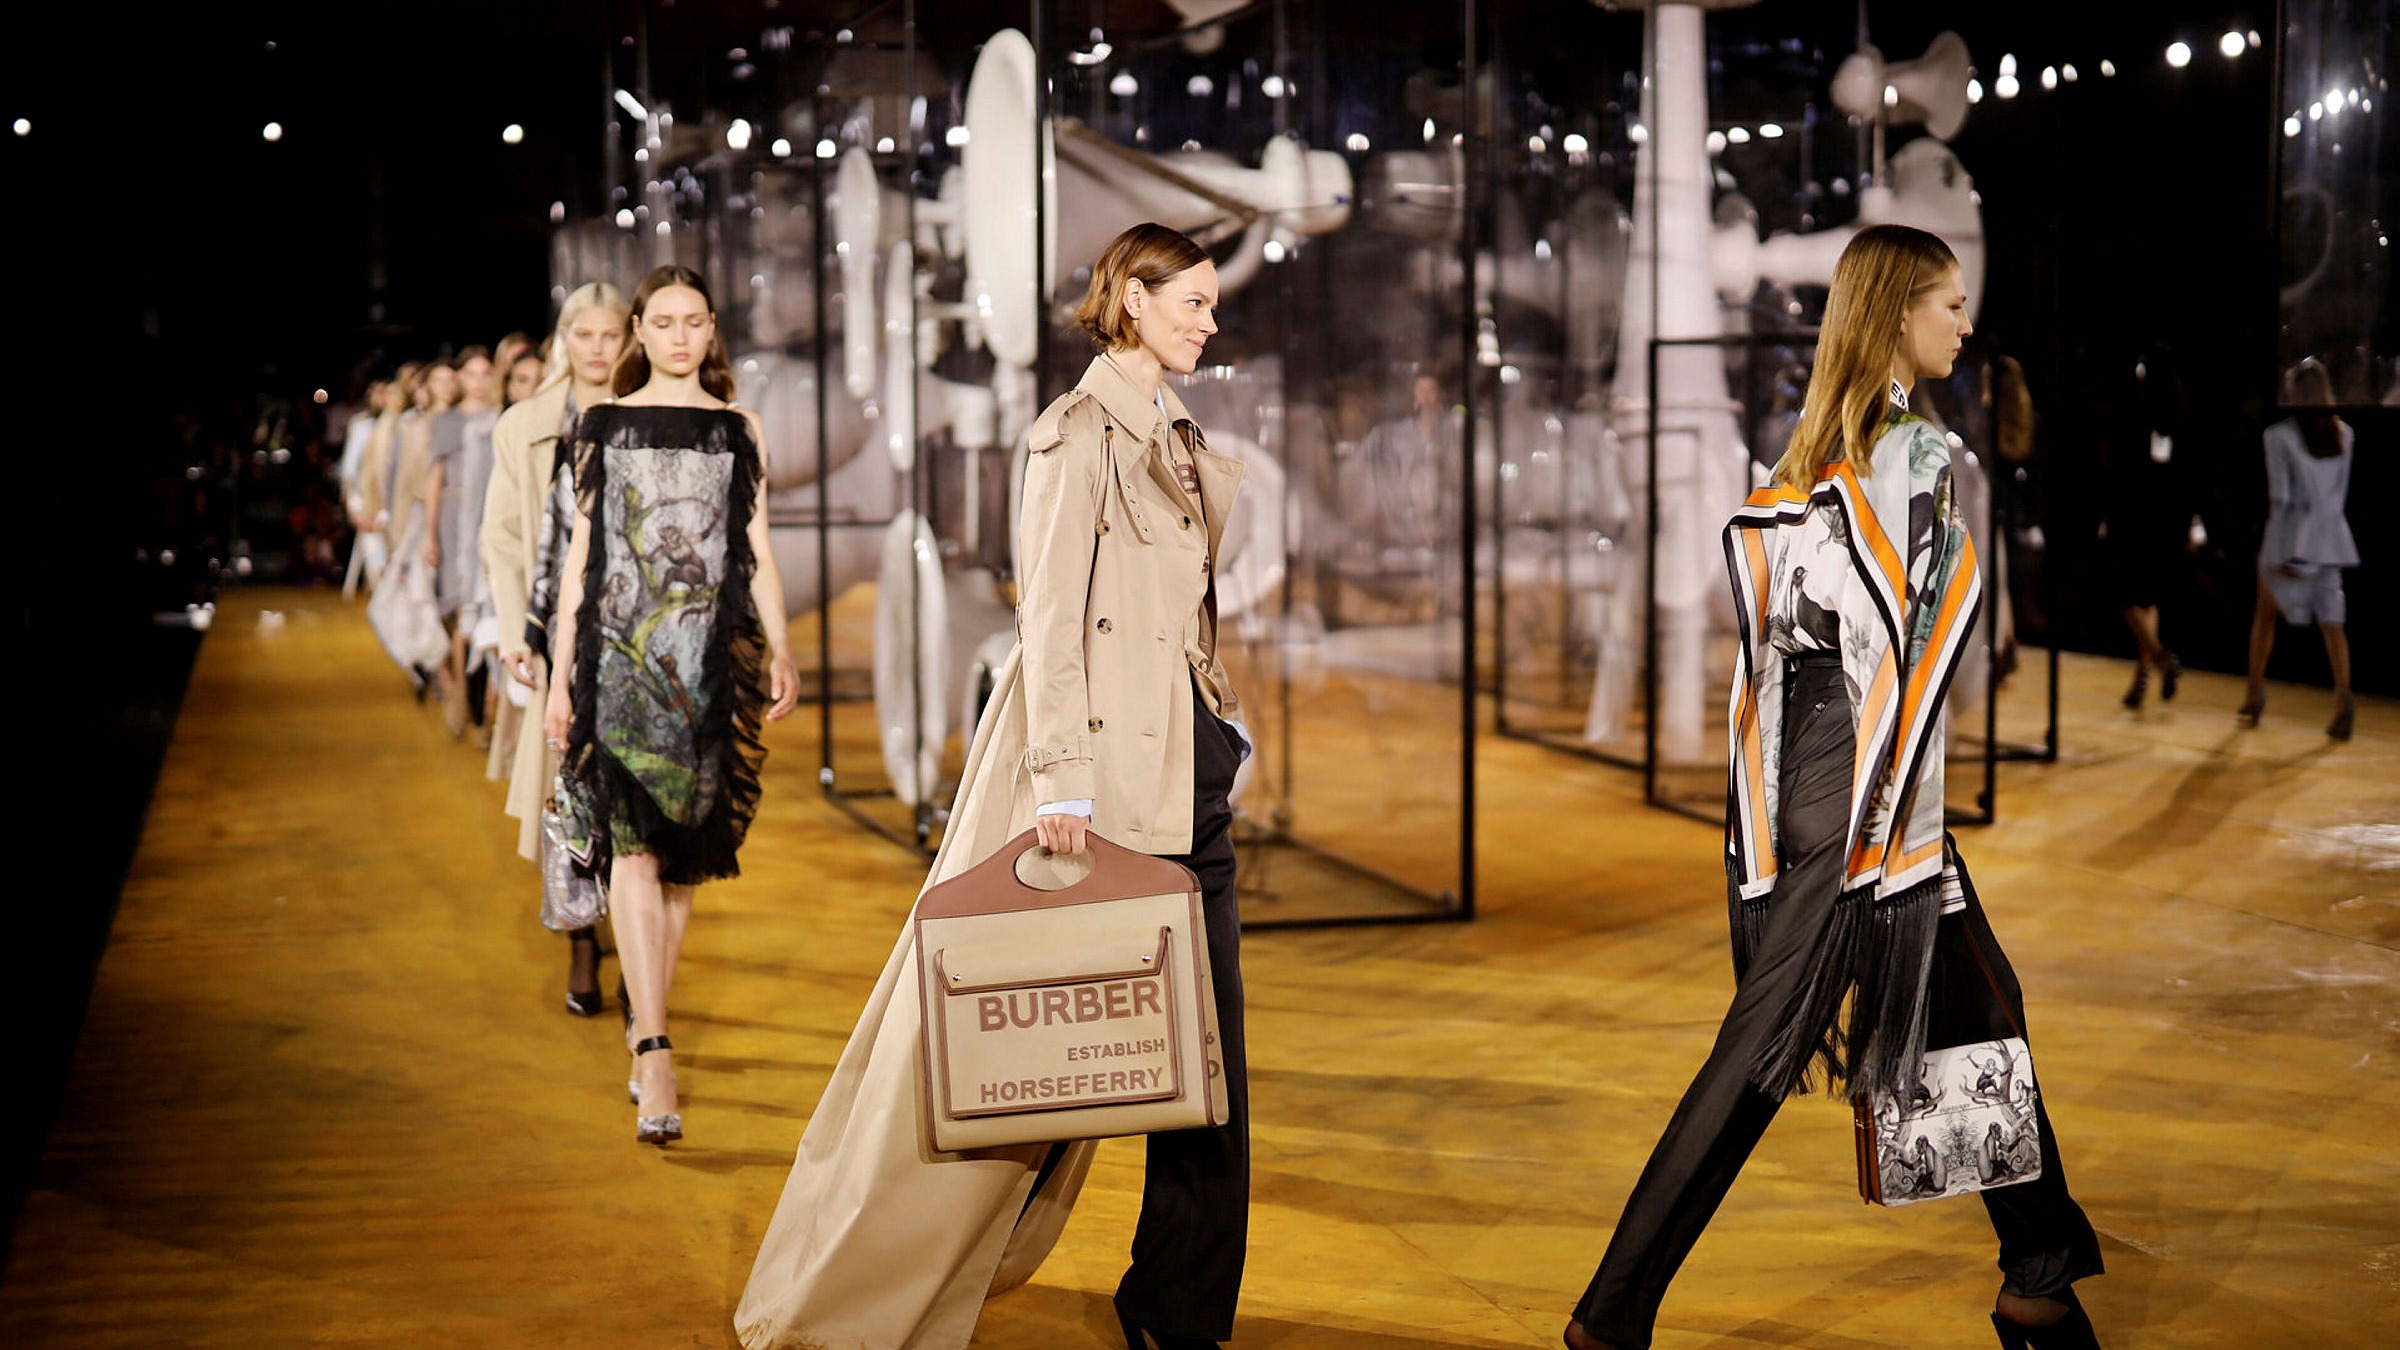 Burberry reinstates dividend but growth falters | Financial Times